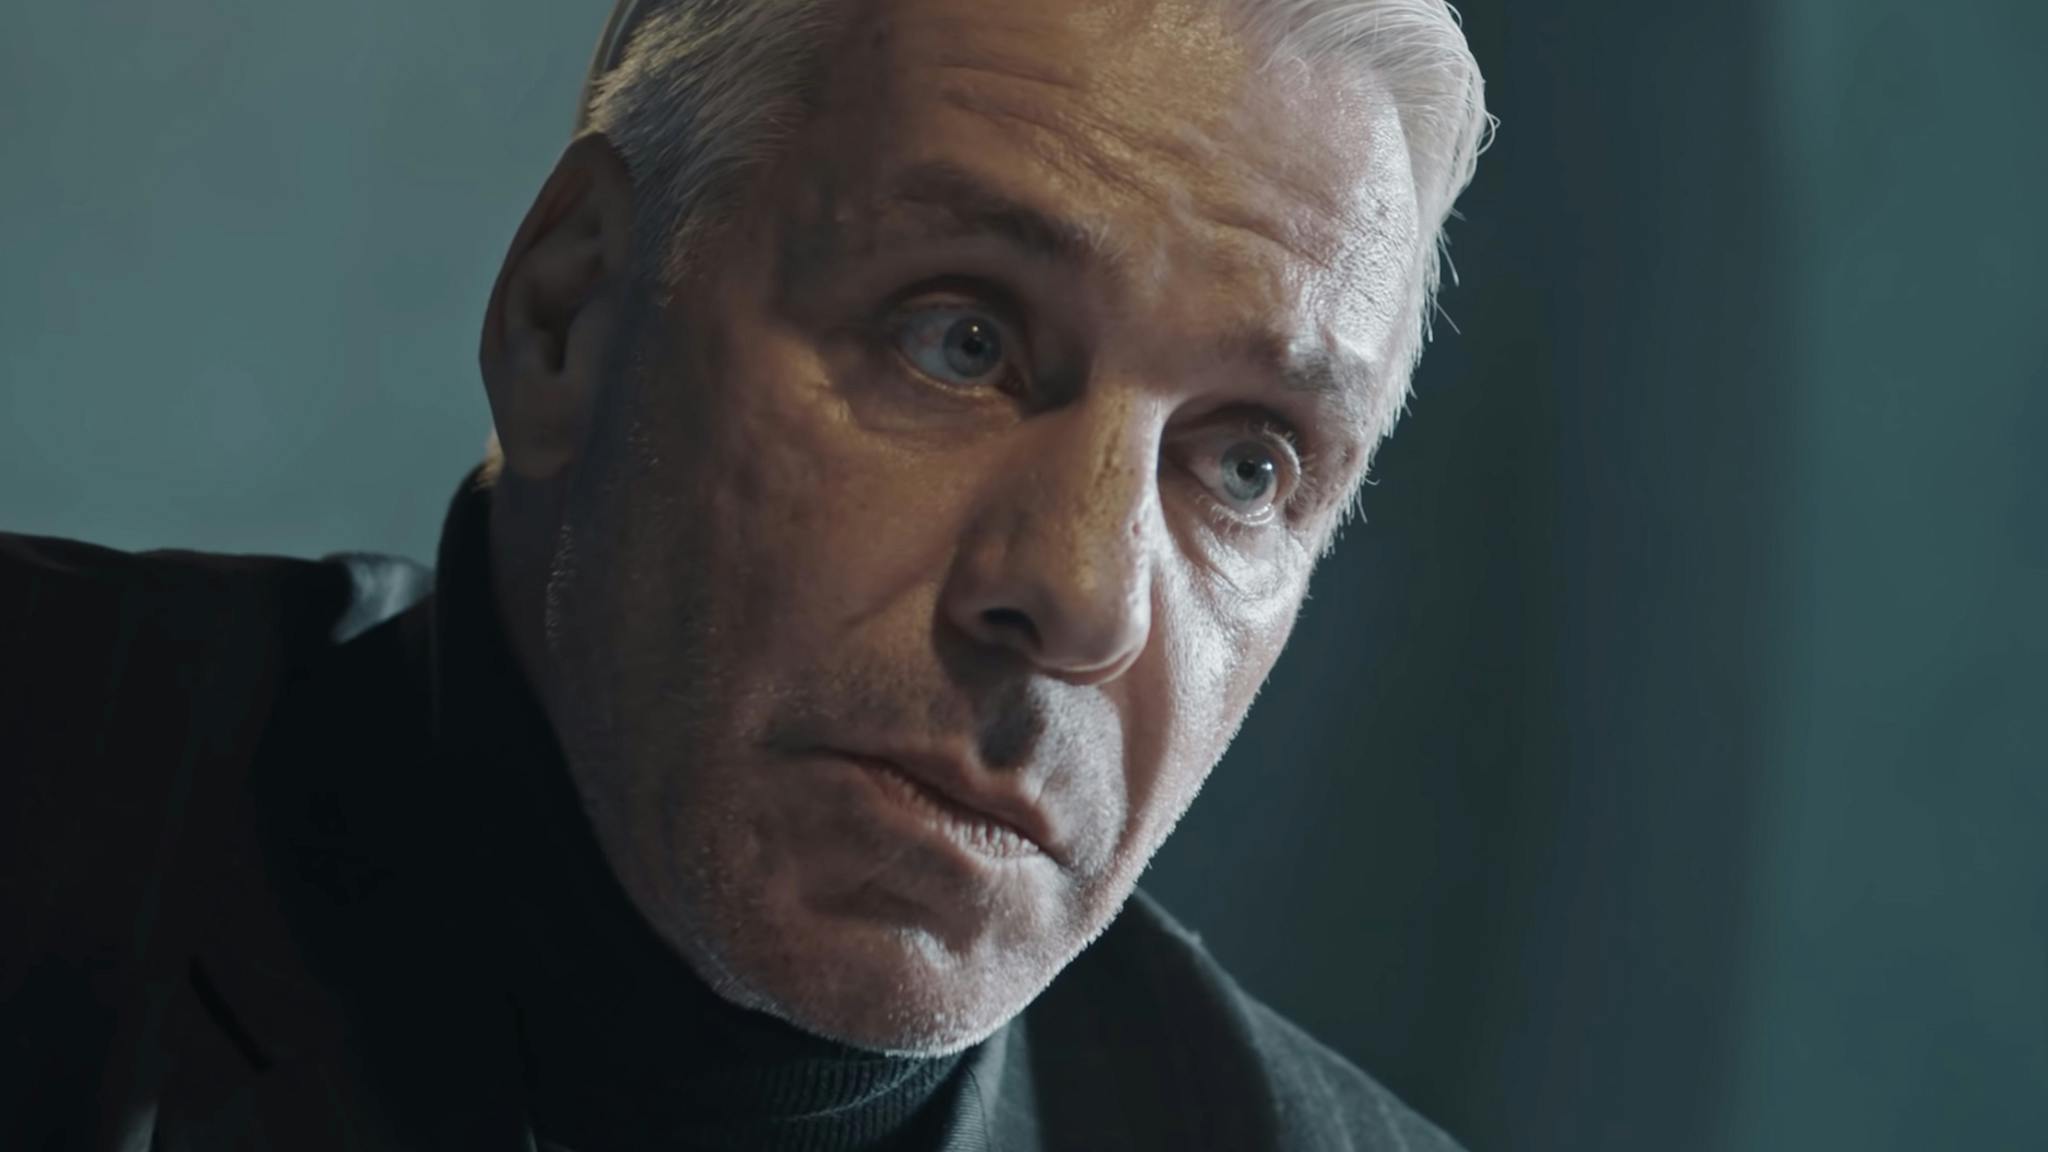 Police investigating sexual offence allegations against Rammstein’s Till Lindemann